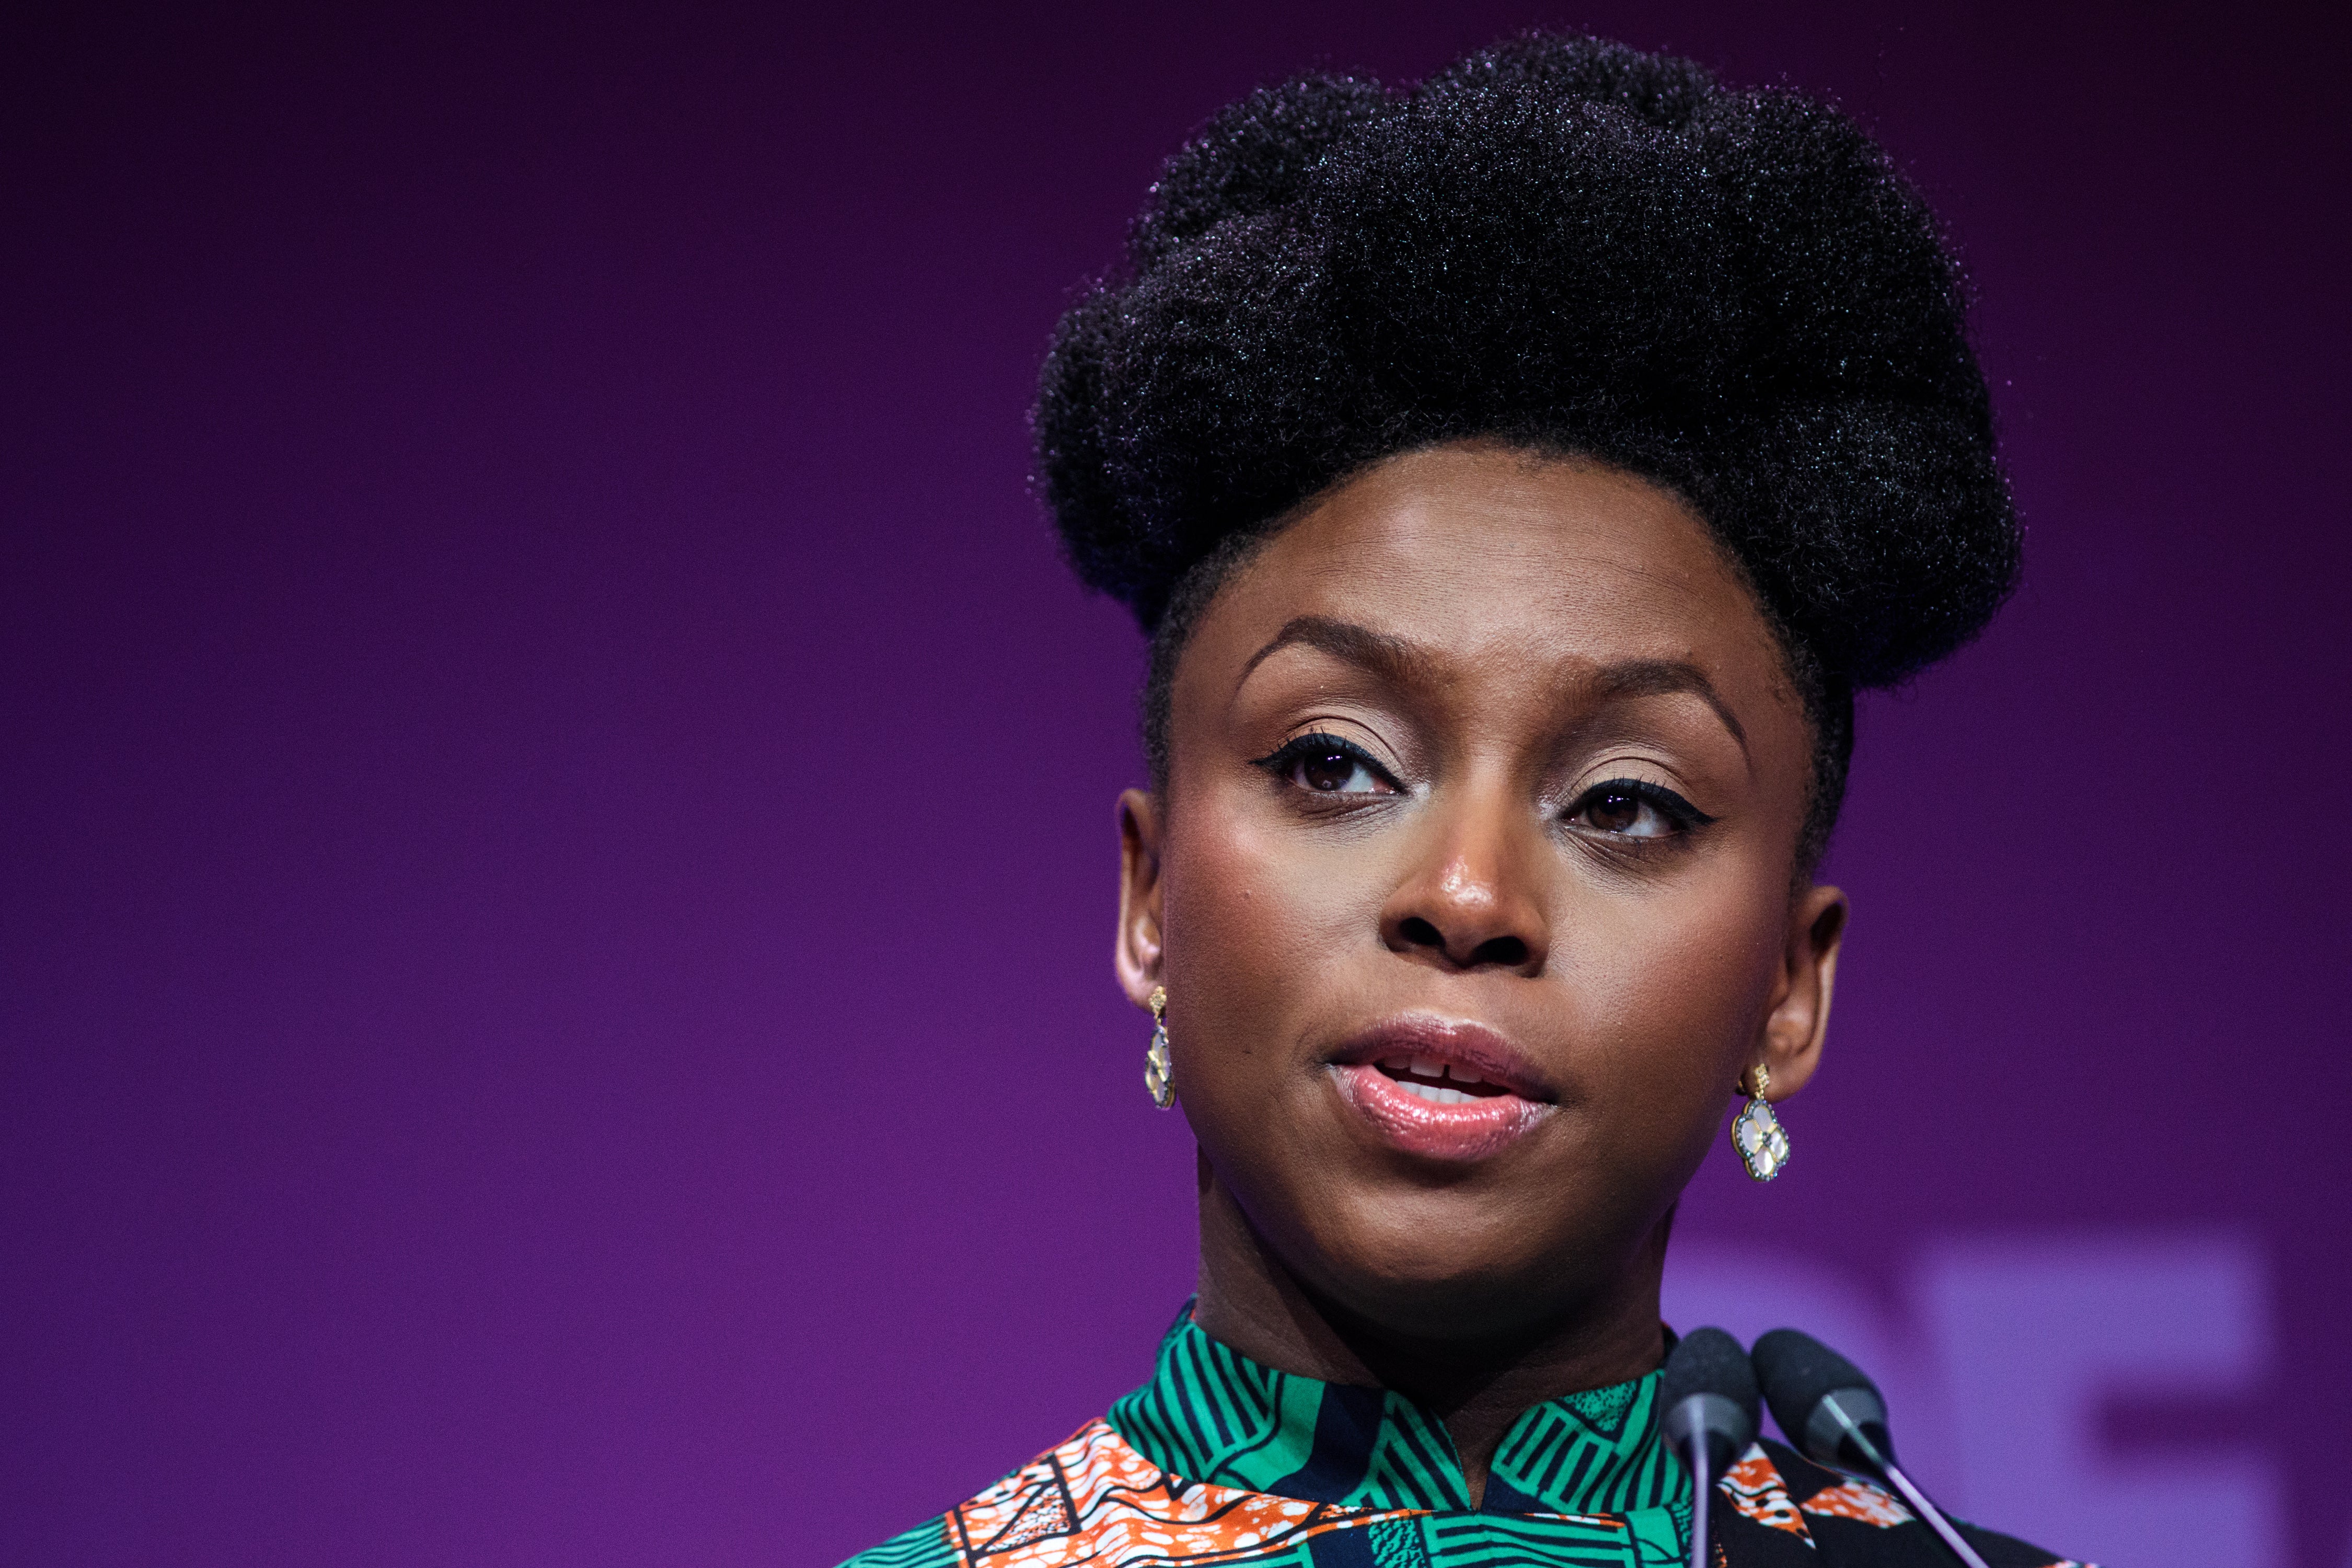 Chimamanda Ngozi Adichie Say the #MeToo Movement Can’t Afford to Be Nuanced Just Yet